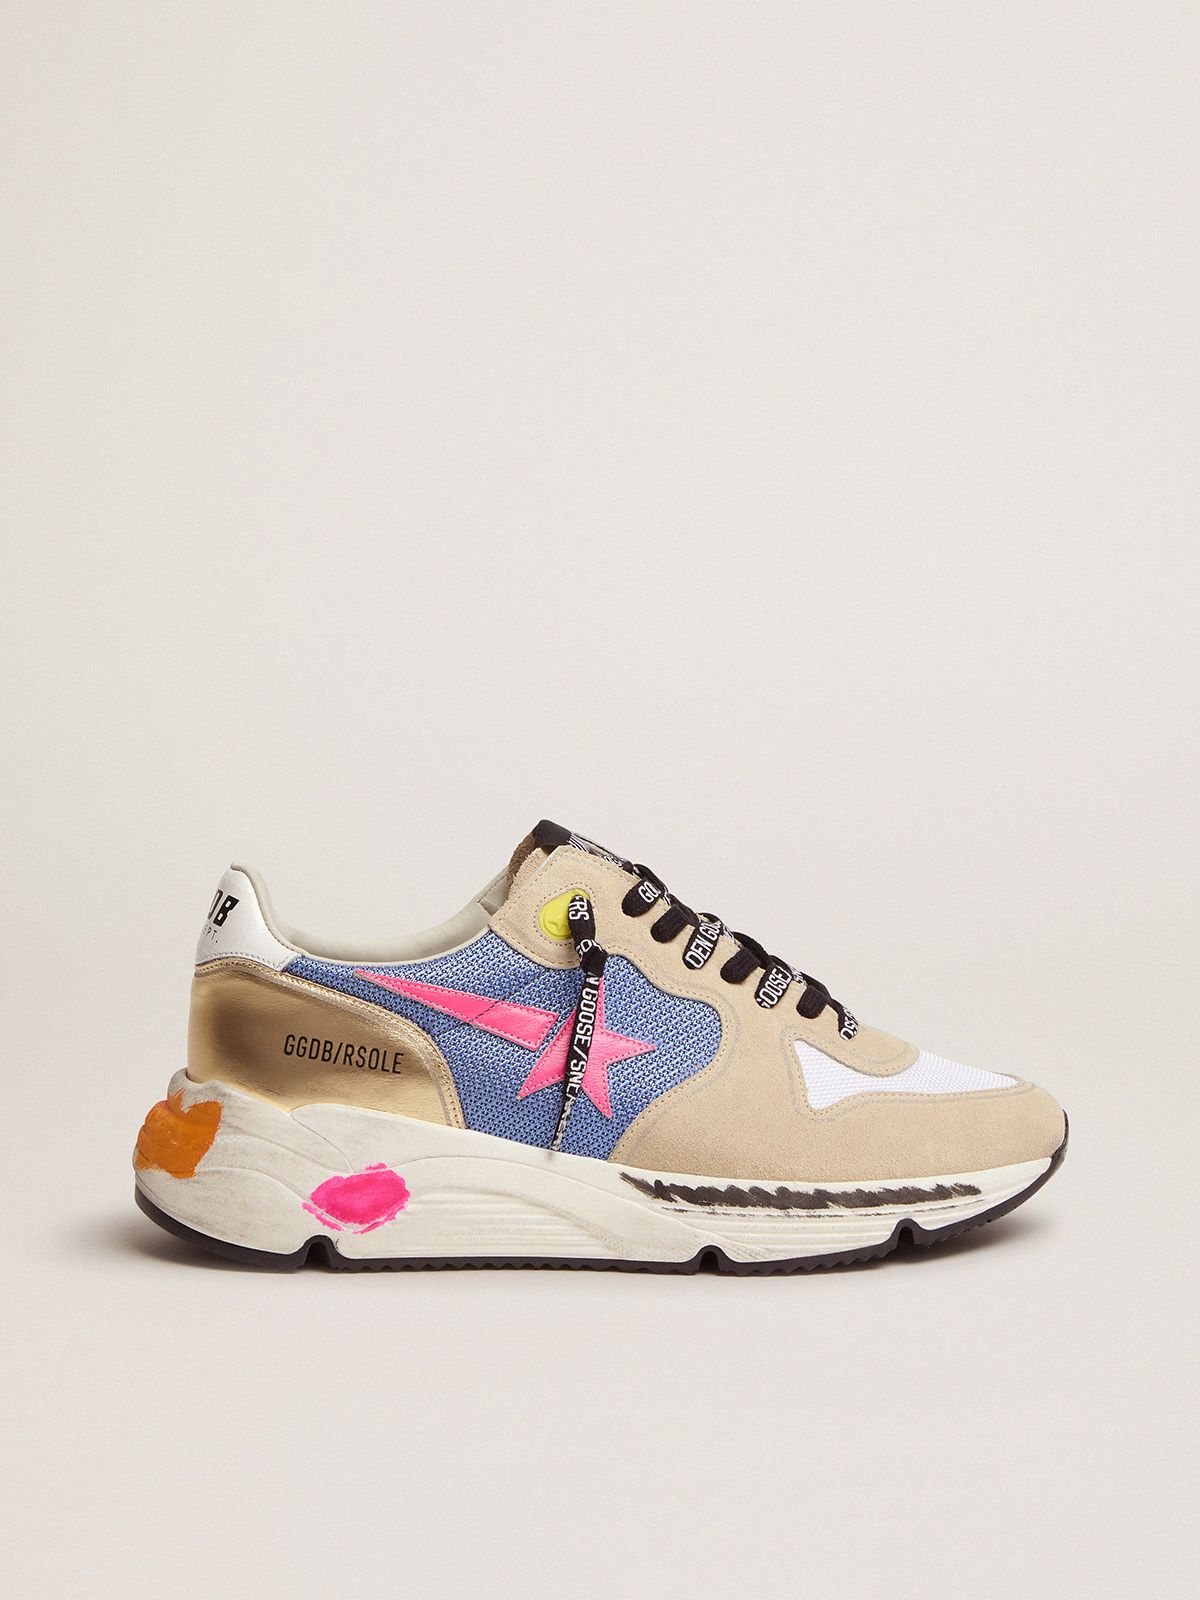 Golden Goose Ball Star Uomo Running Sole sneakers in suede with gold detail